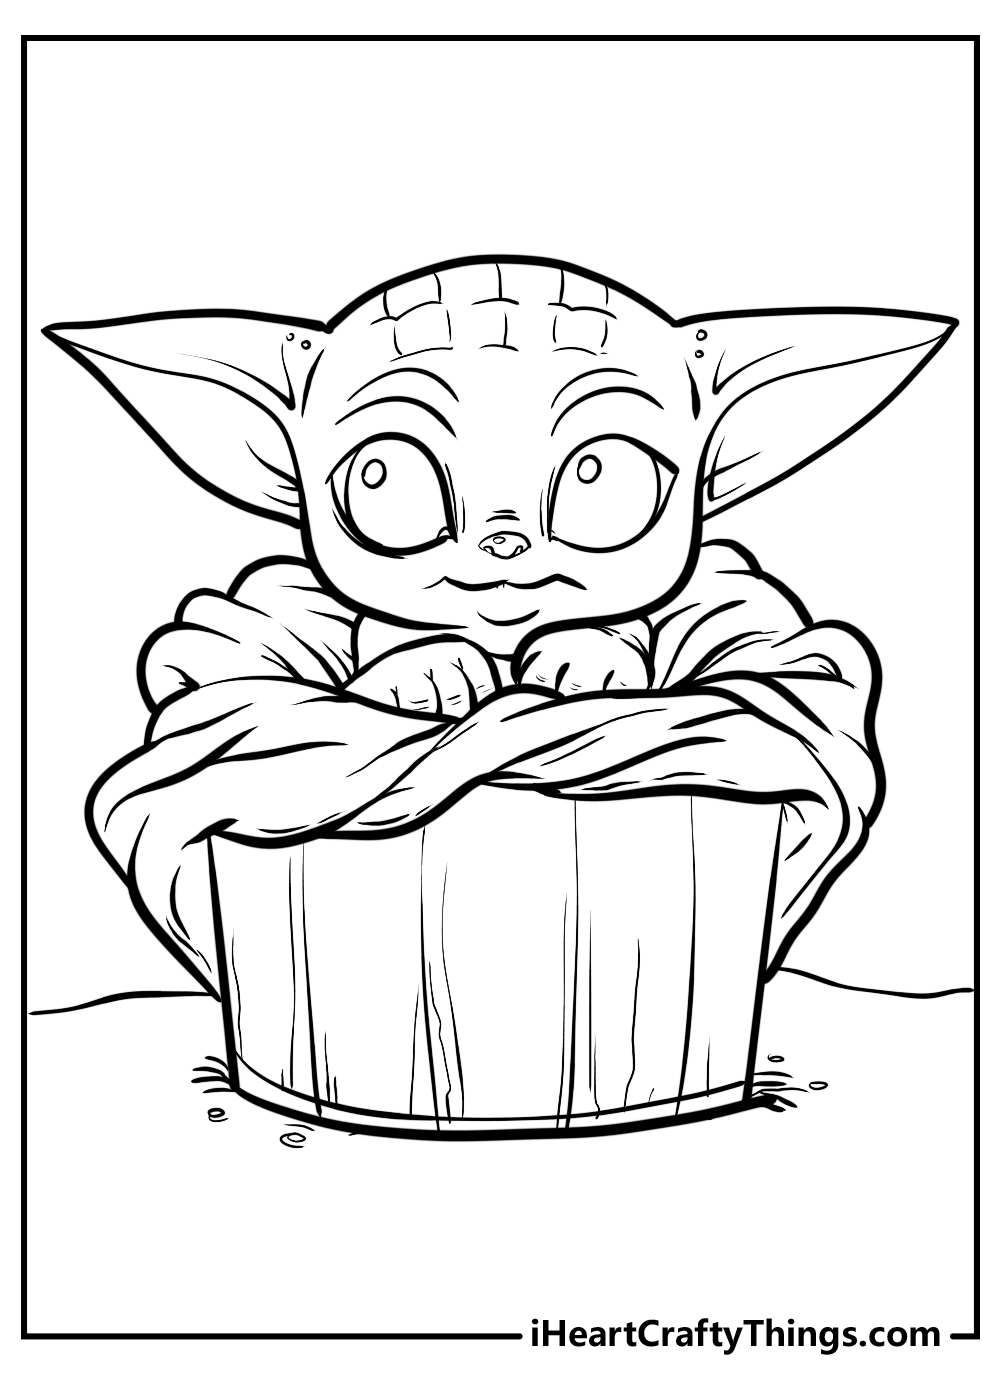 Printable baby yoda coloring pages updated